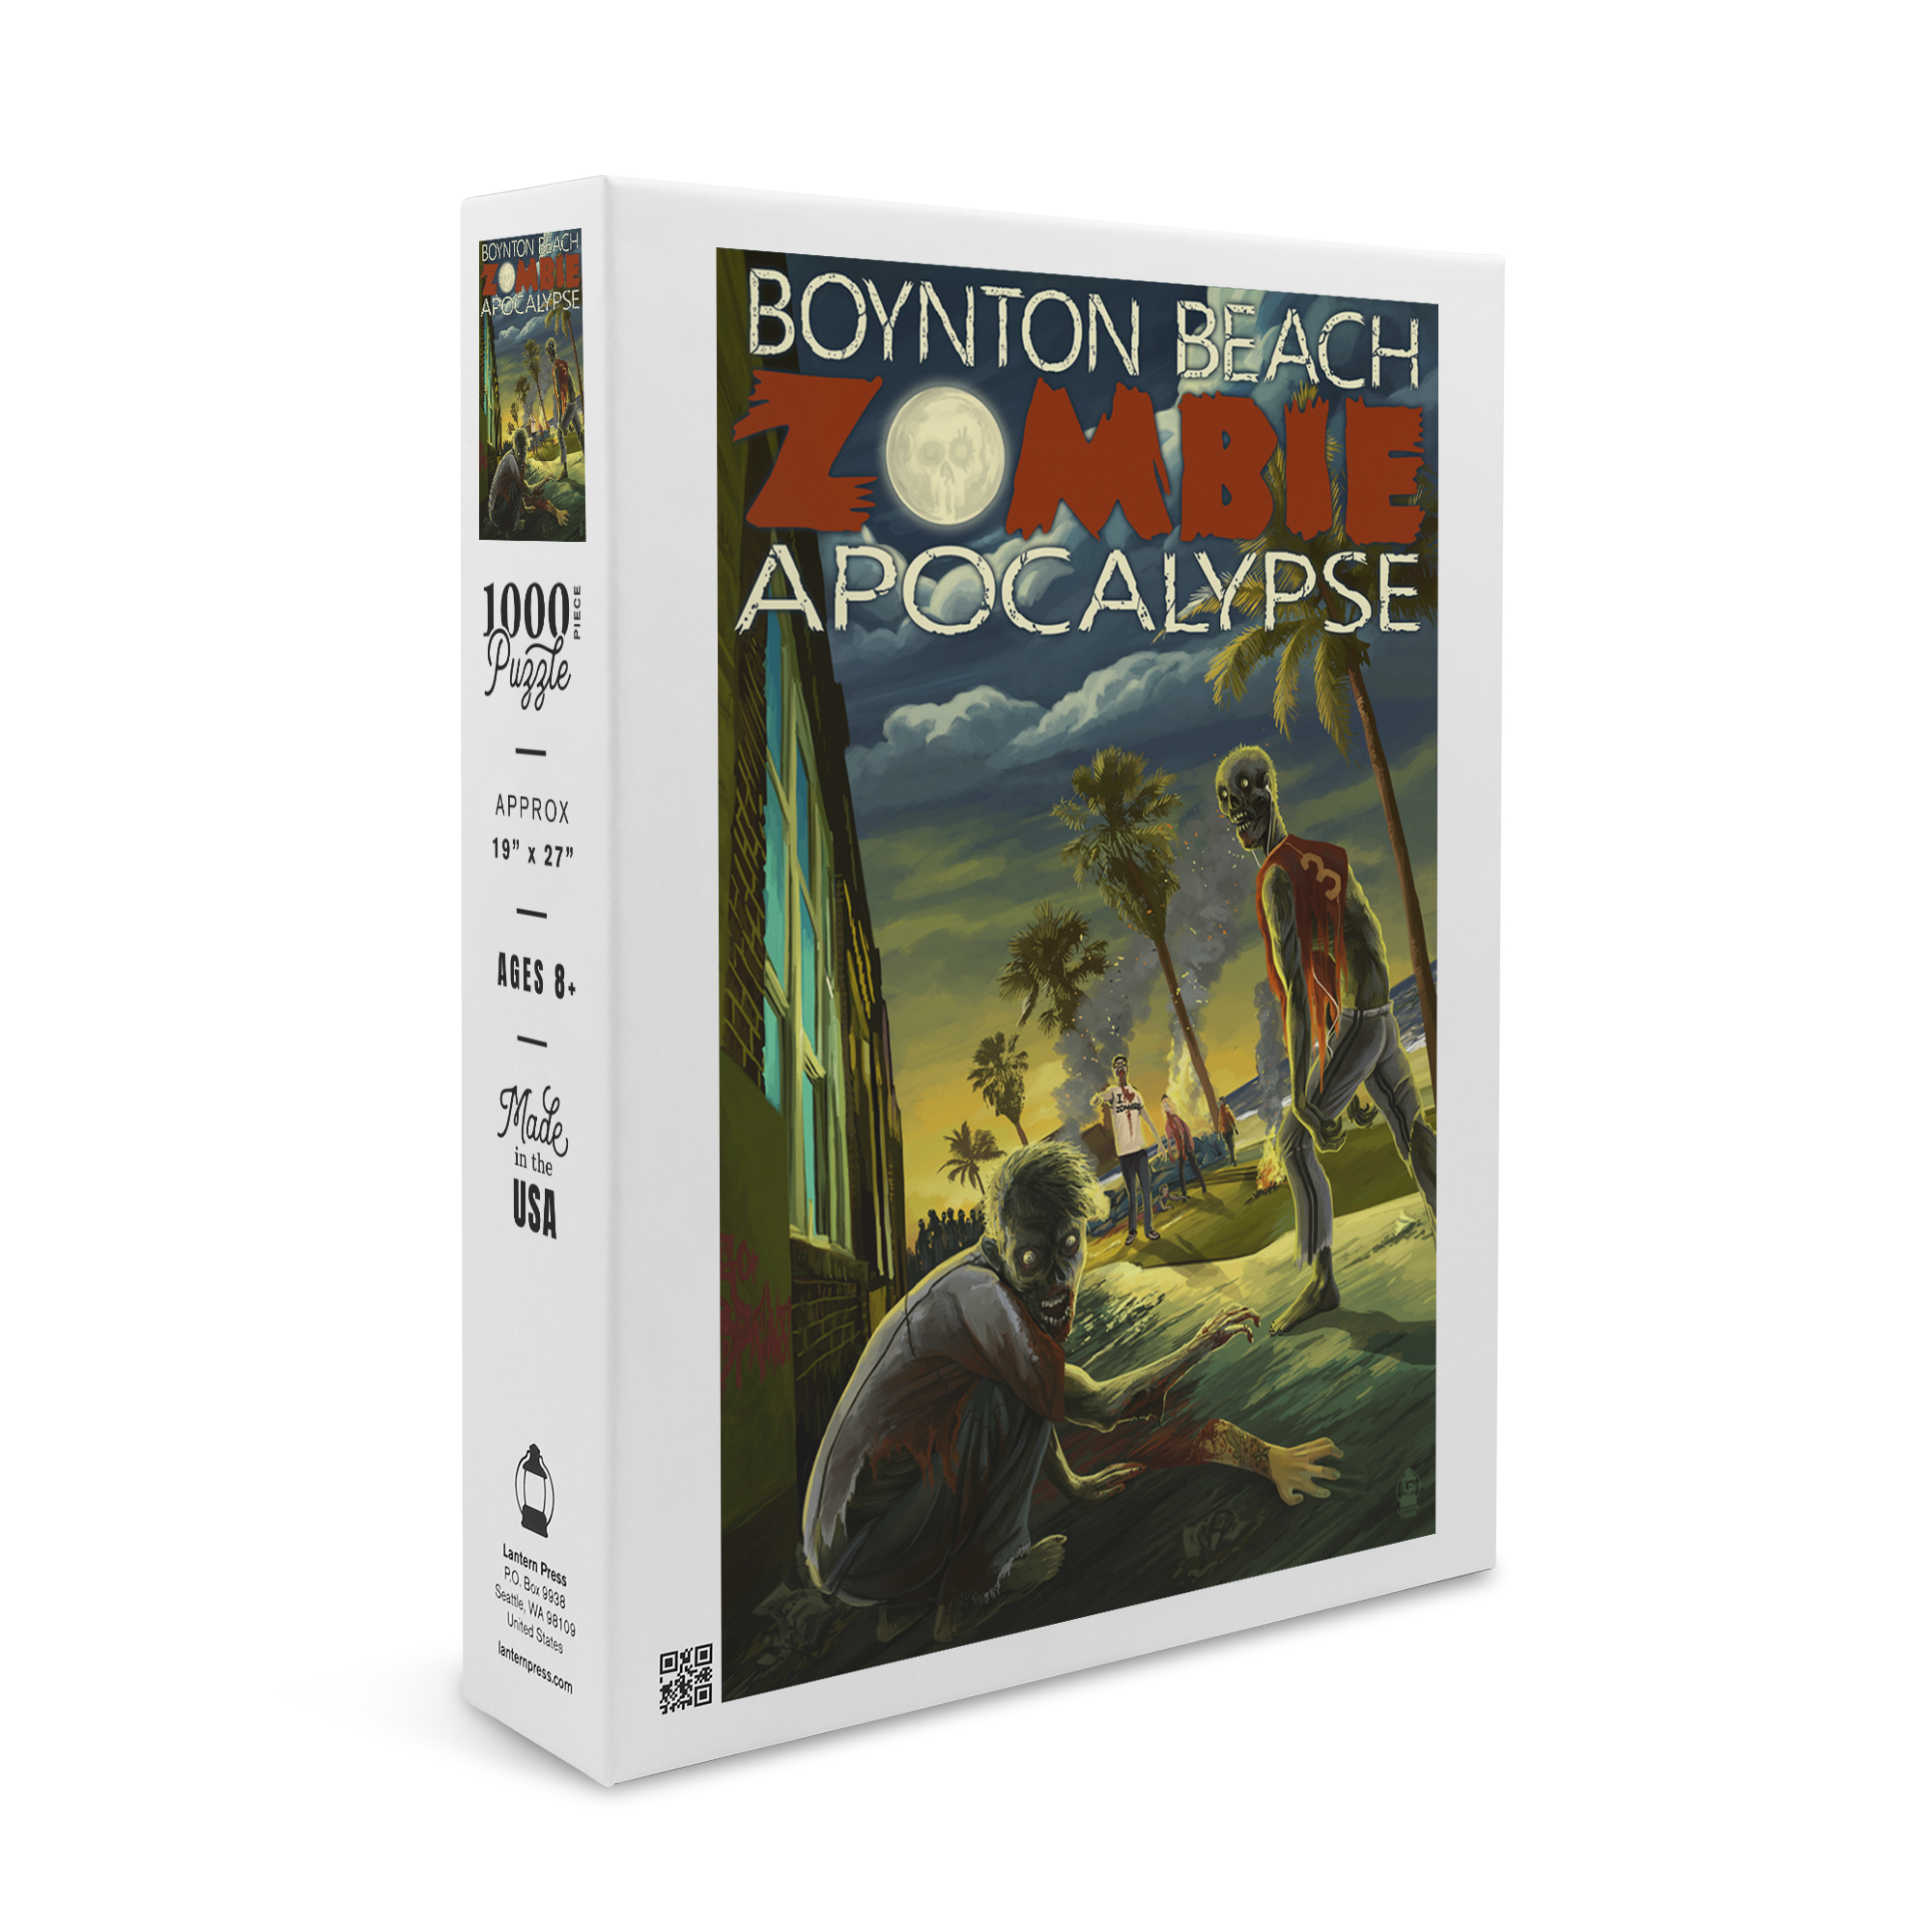 Boynton Beach, Florida, Zombie Apocalypse (1000 Piece Puzzle, Size 19x27, Challenging Jigsaw Puzzle for Adults and Family, Made in USA) - image 1 of 4